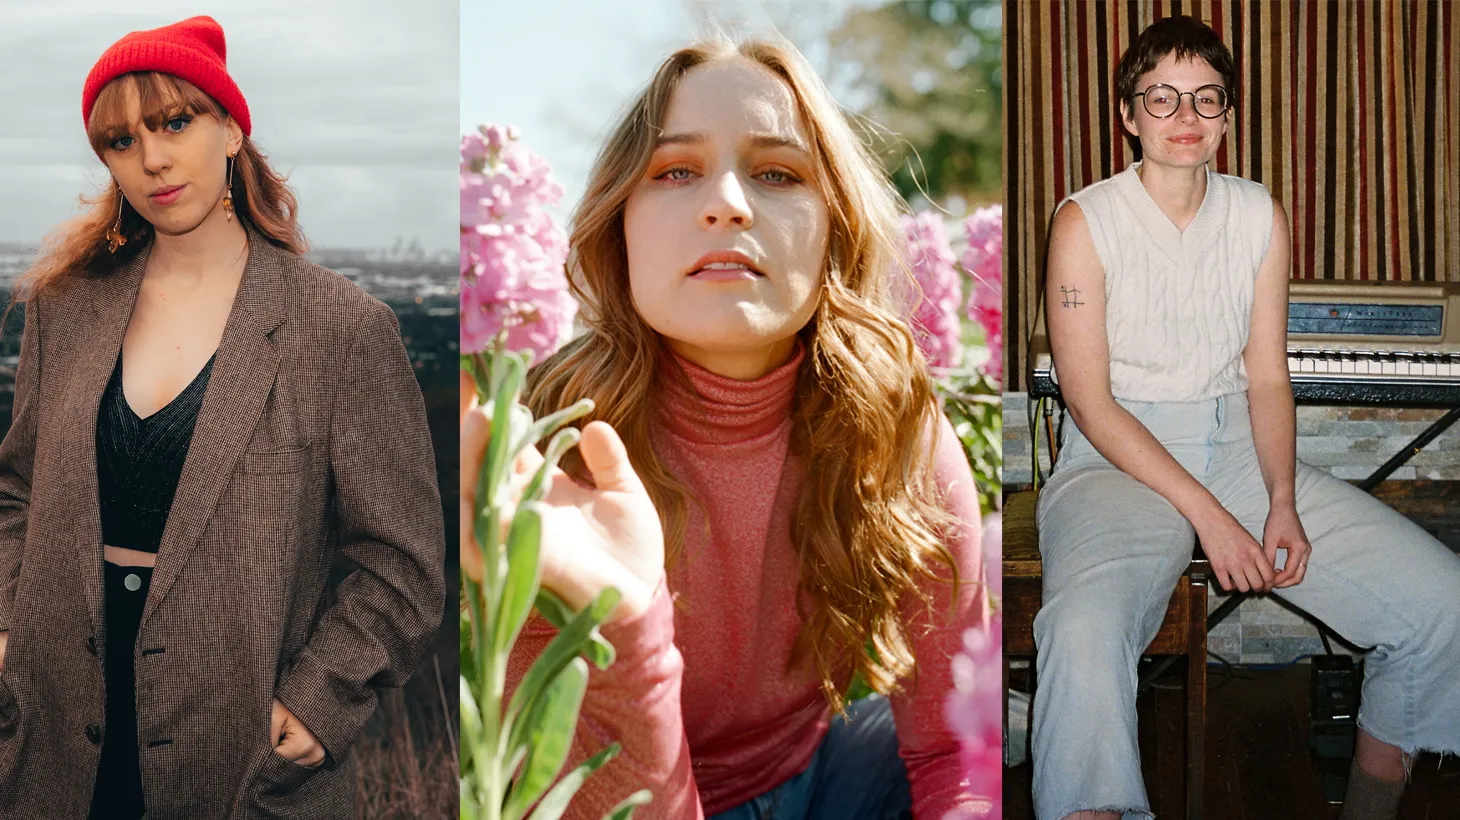 This week’s Global Beat features the Australian sounds of Joan & the Giants, Jack River, and Ruby Gill.